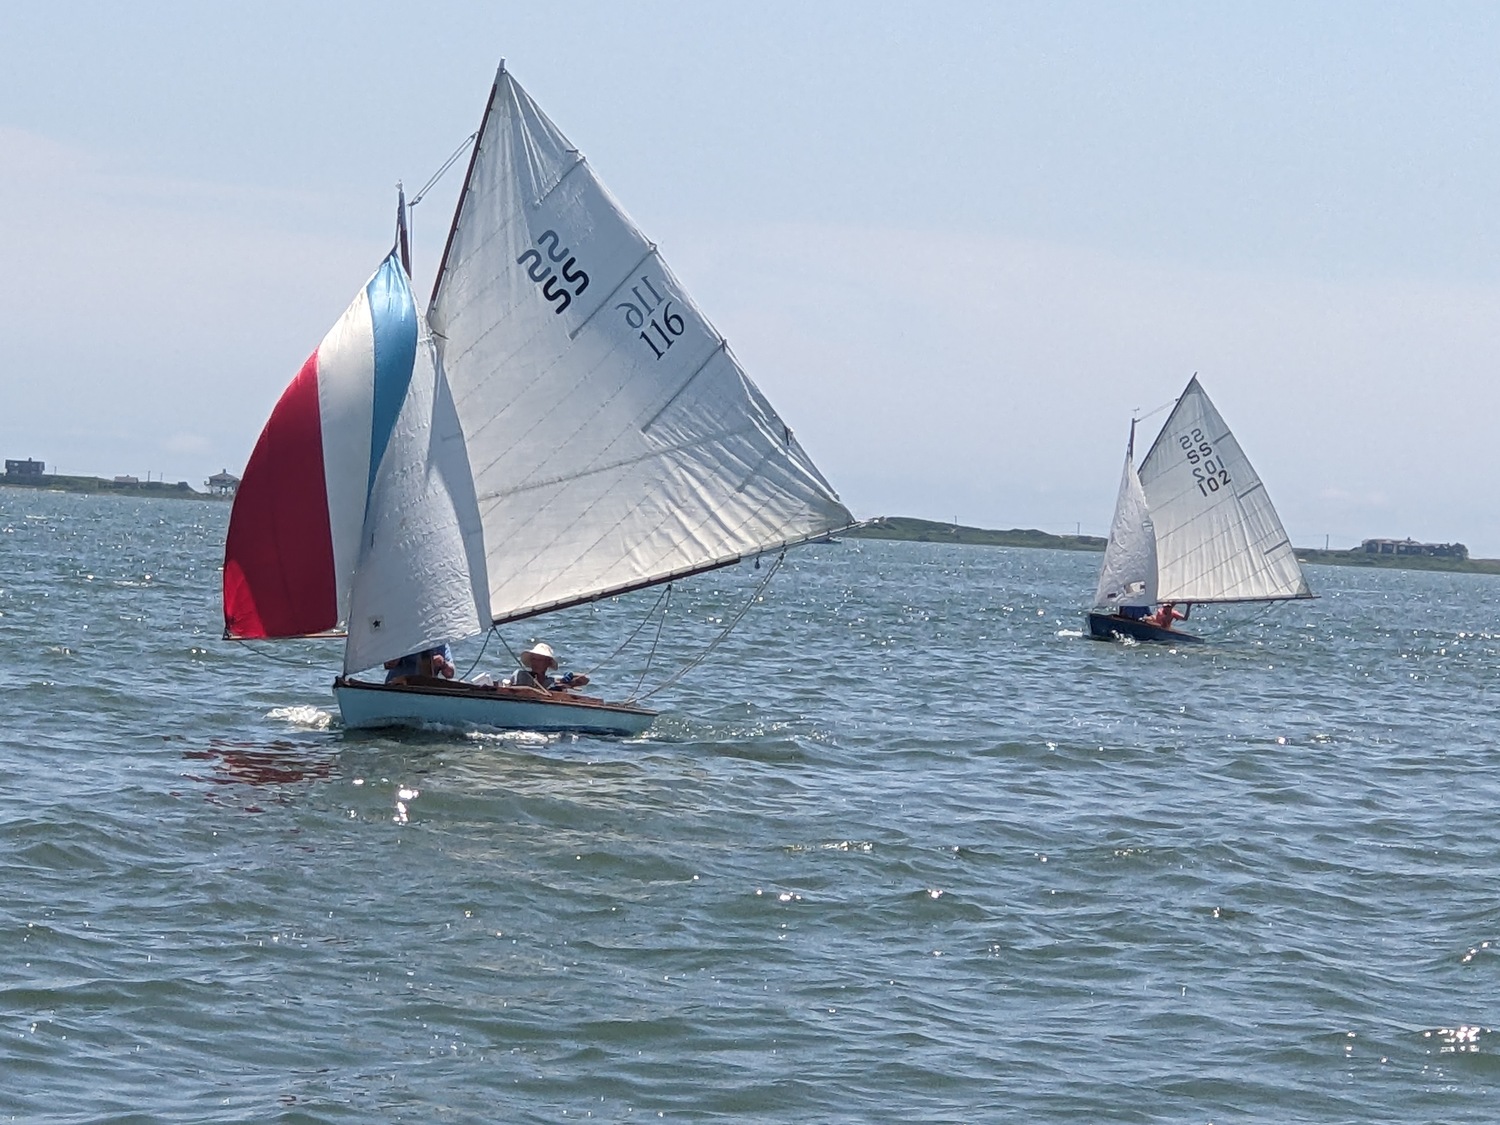 Rob Dudley and Jim Ewing in SS 116 Fey have their spinnaker out.